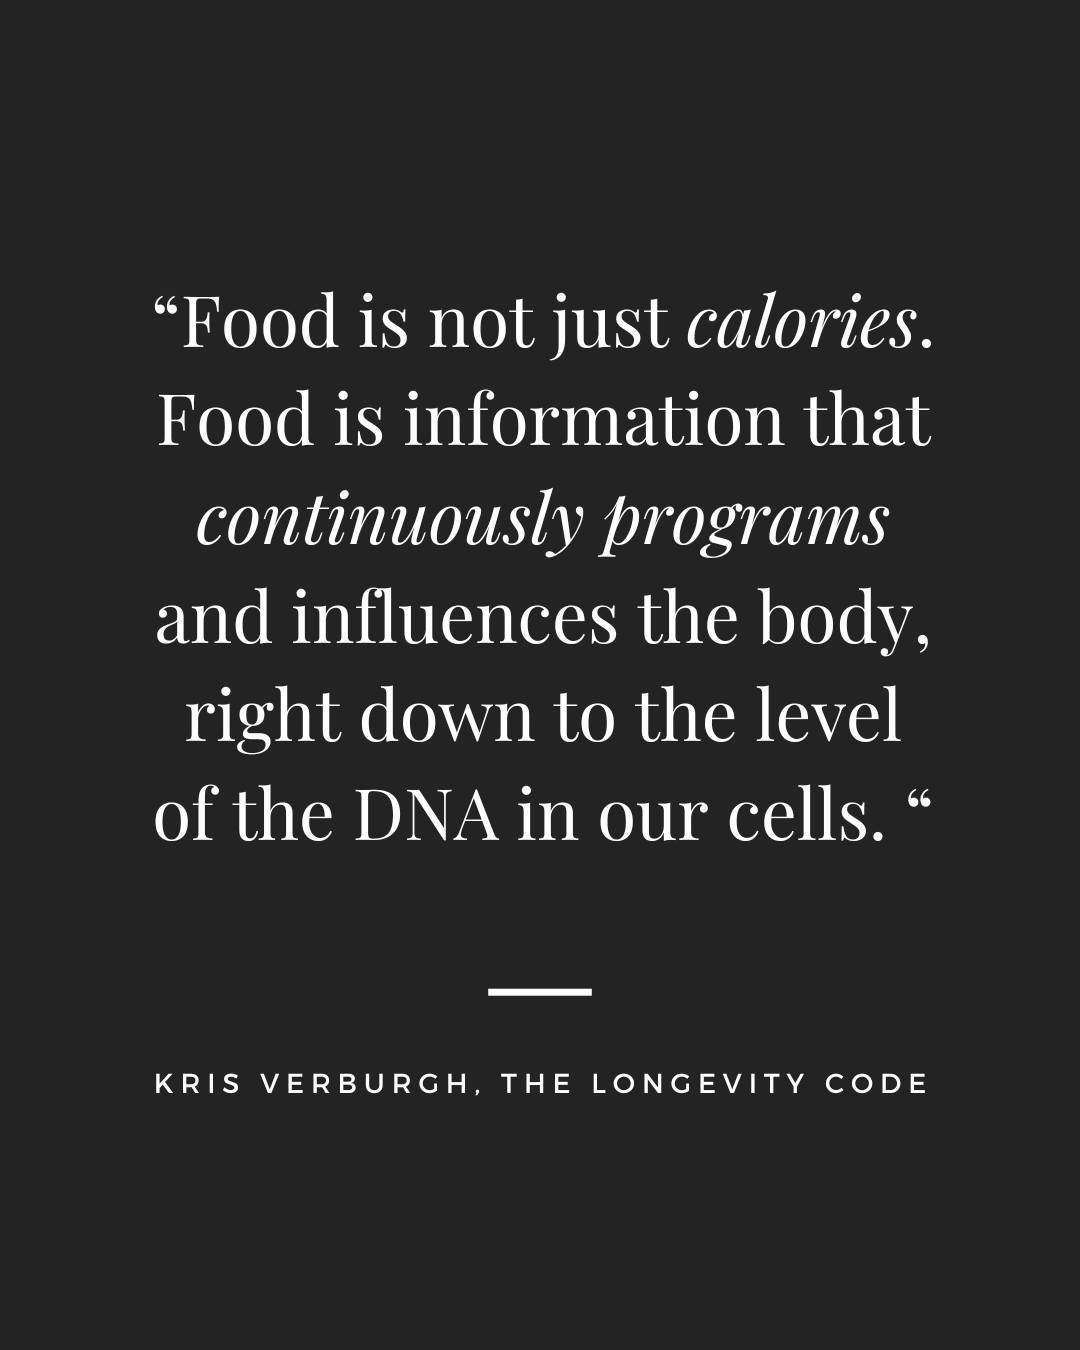 There is so much new research to back the science of longevity.⁠
⁠
One of my favorite reads about this is &quot;The Longevity Code&quot; by Kris Verburgh. Verburgh explores the science behind aging and offers insights into how we can potentially exte